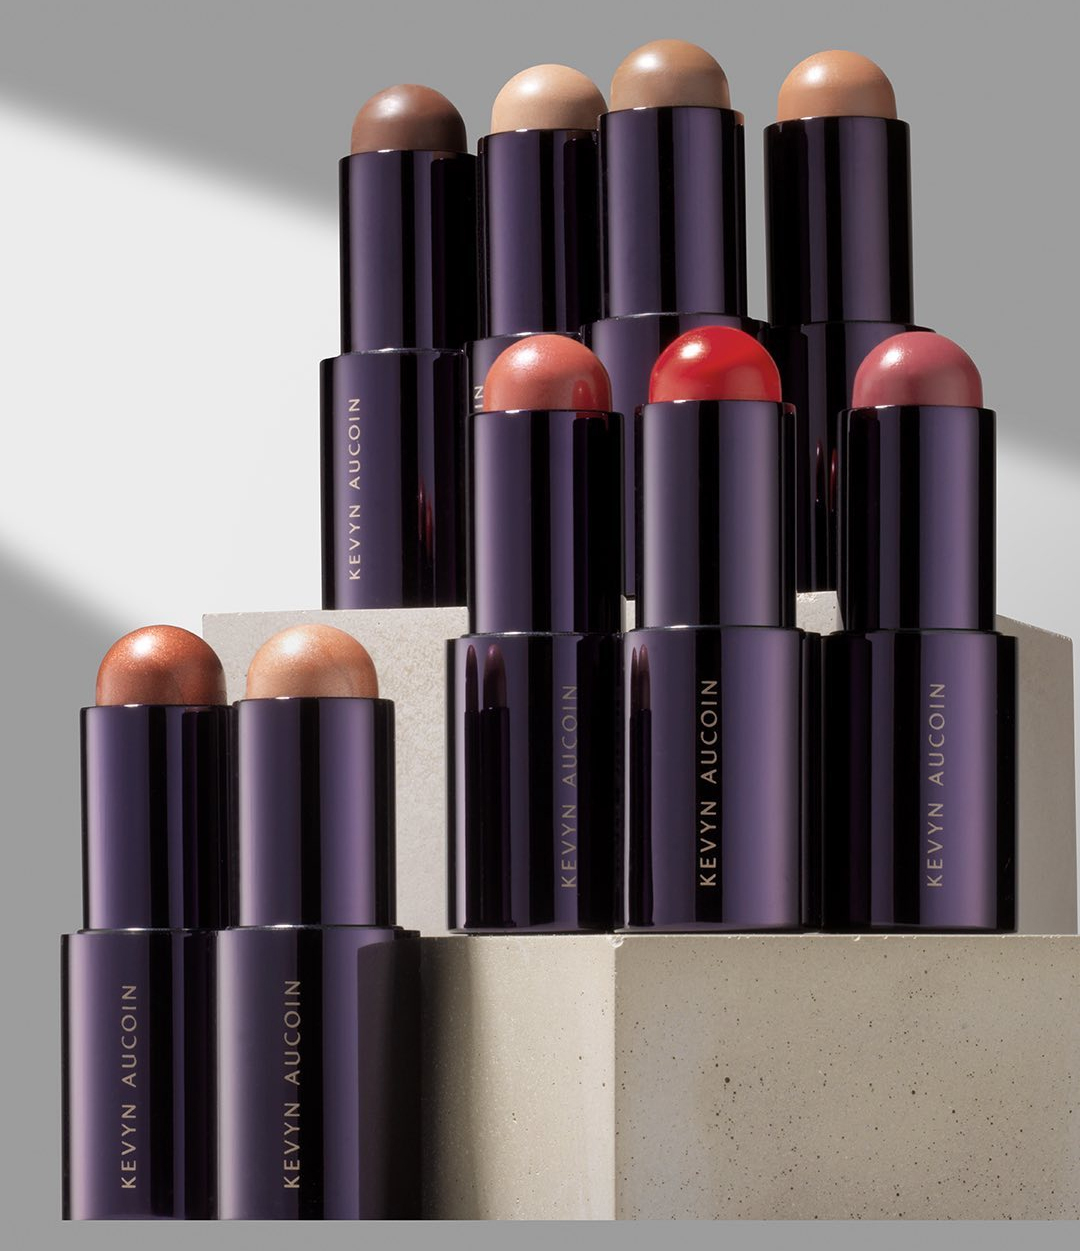 New launches from Kevyn Aucoin Beauty